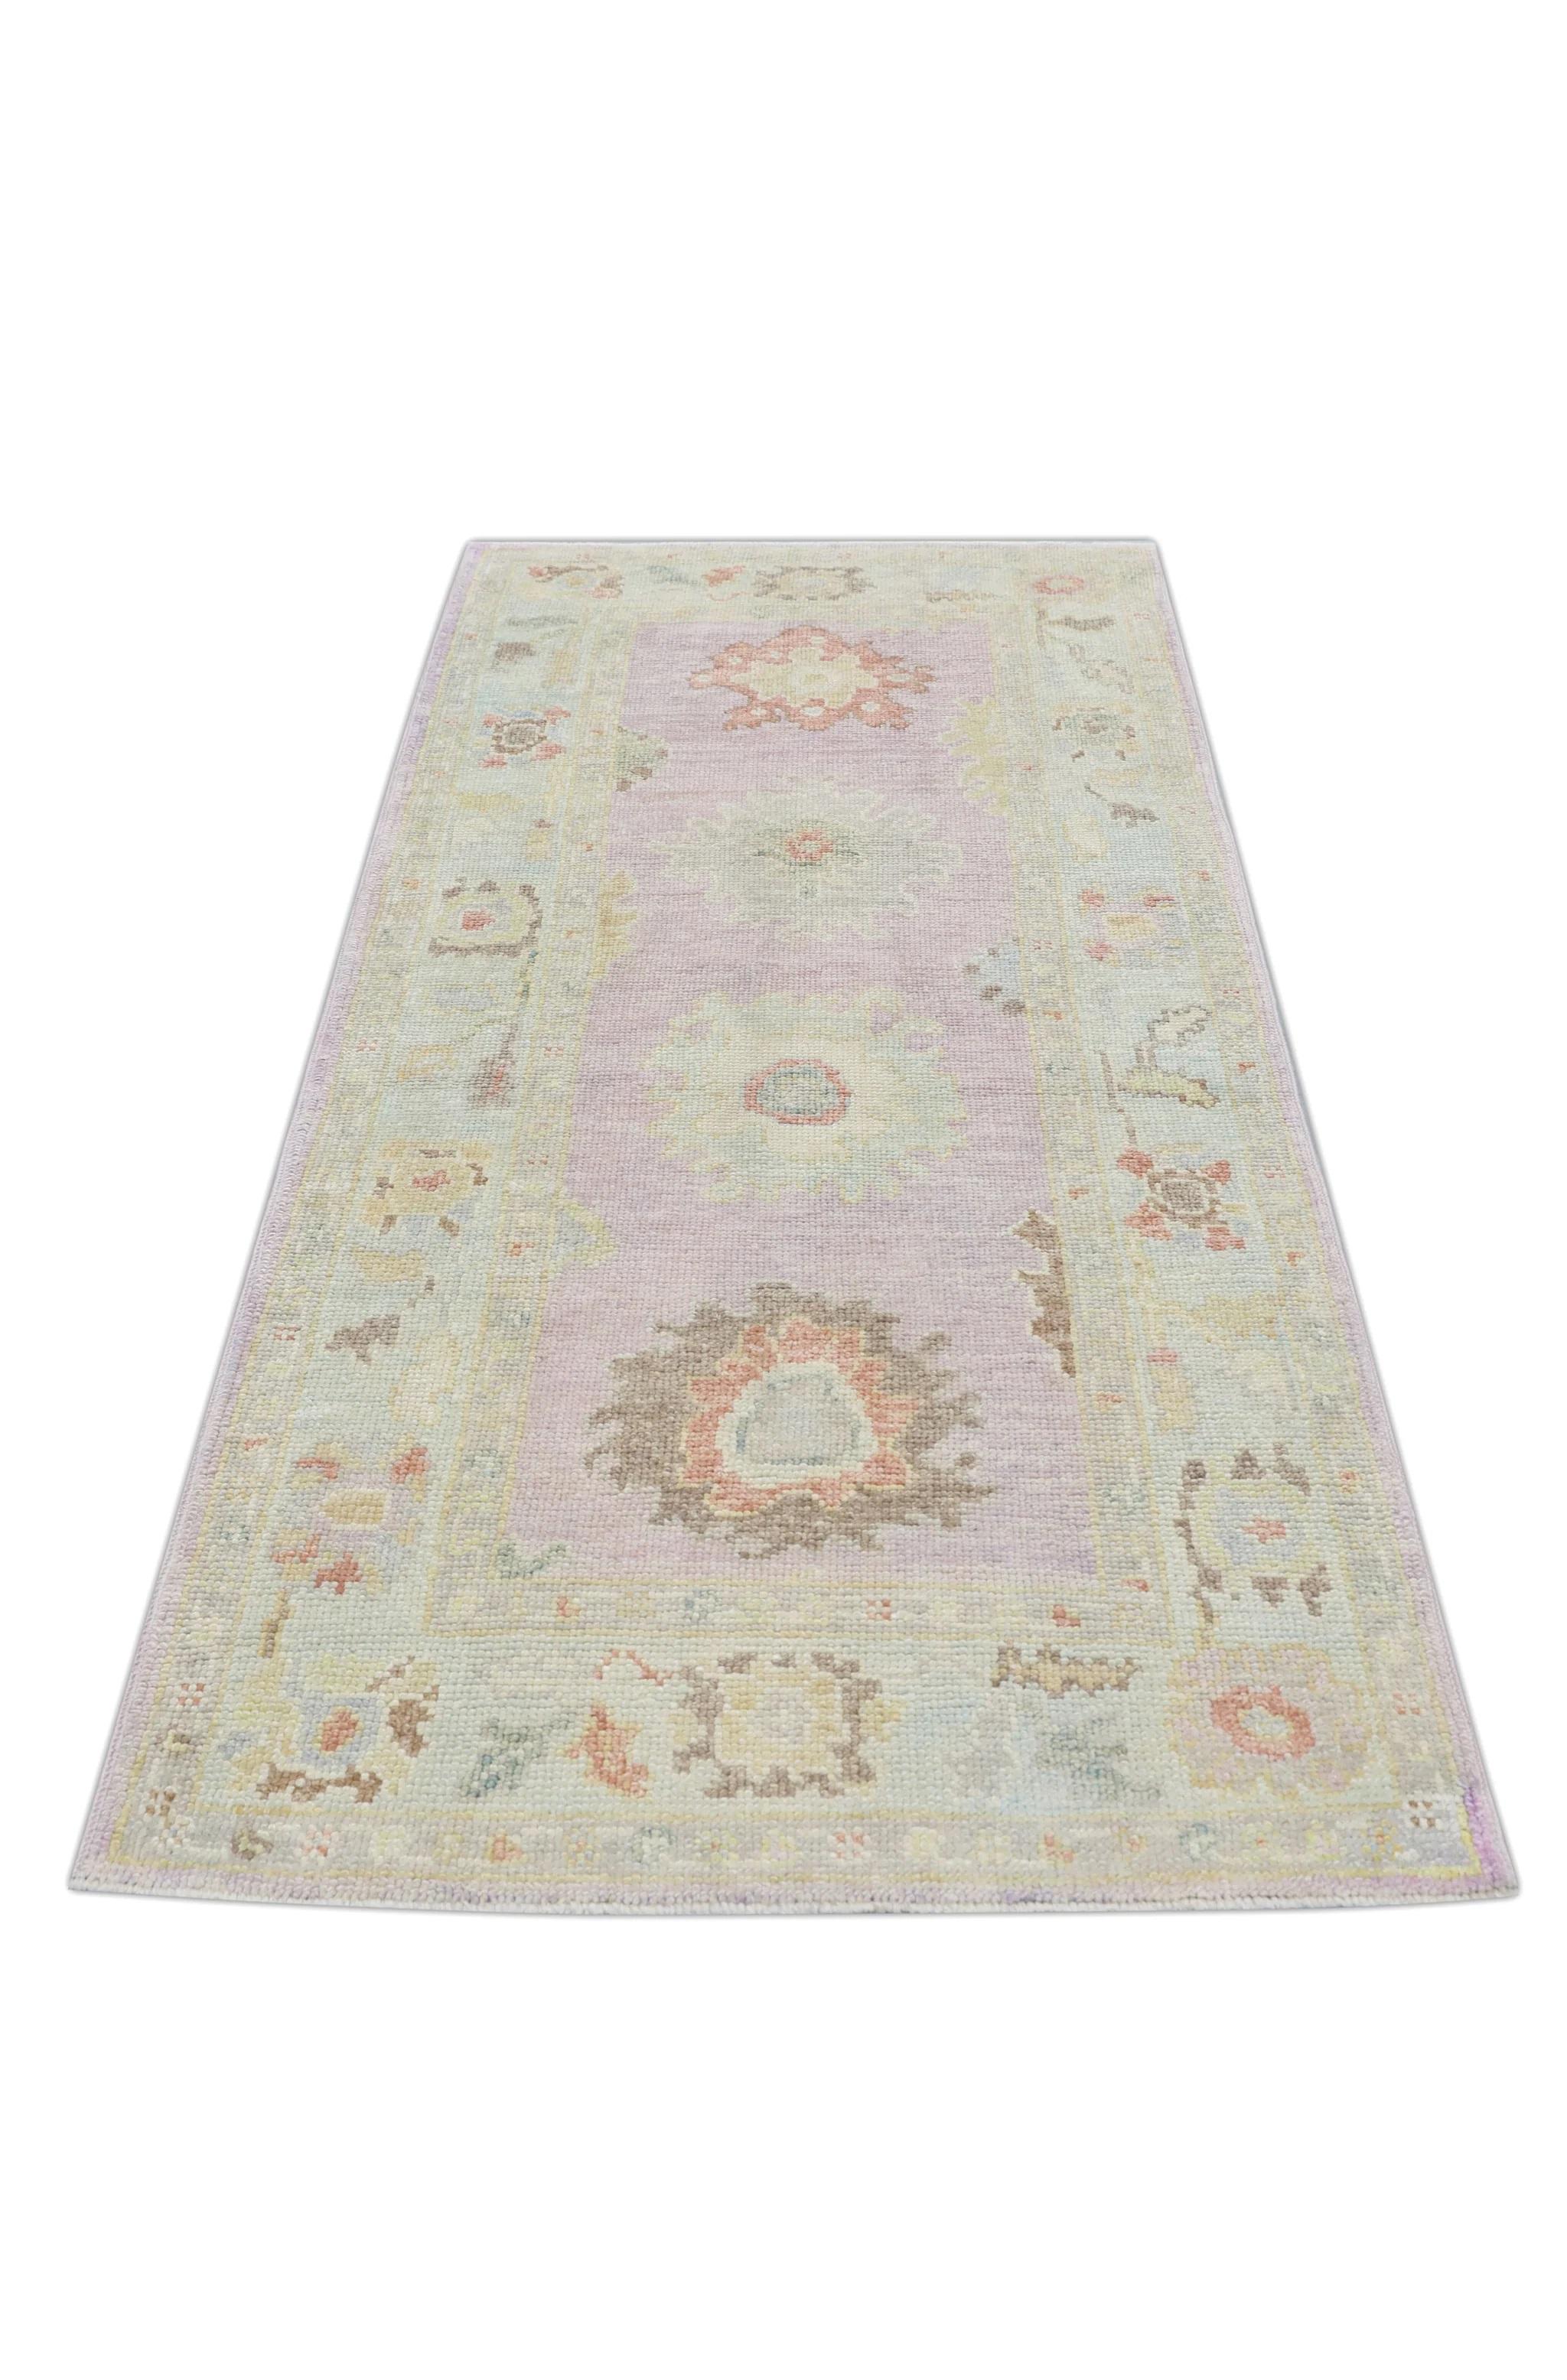 Pink Handwoven Wool Turkish Oushak Rug with Floral Design 3'1